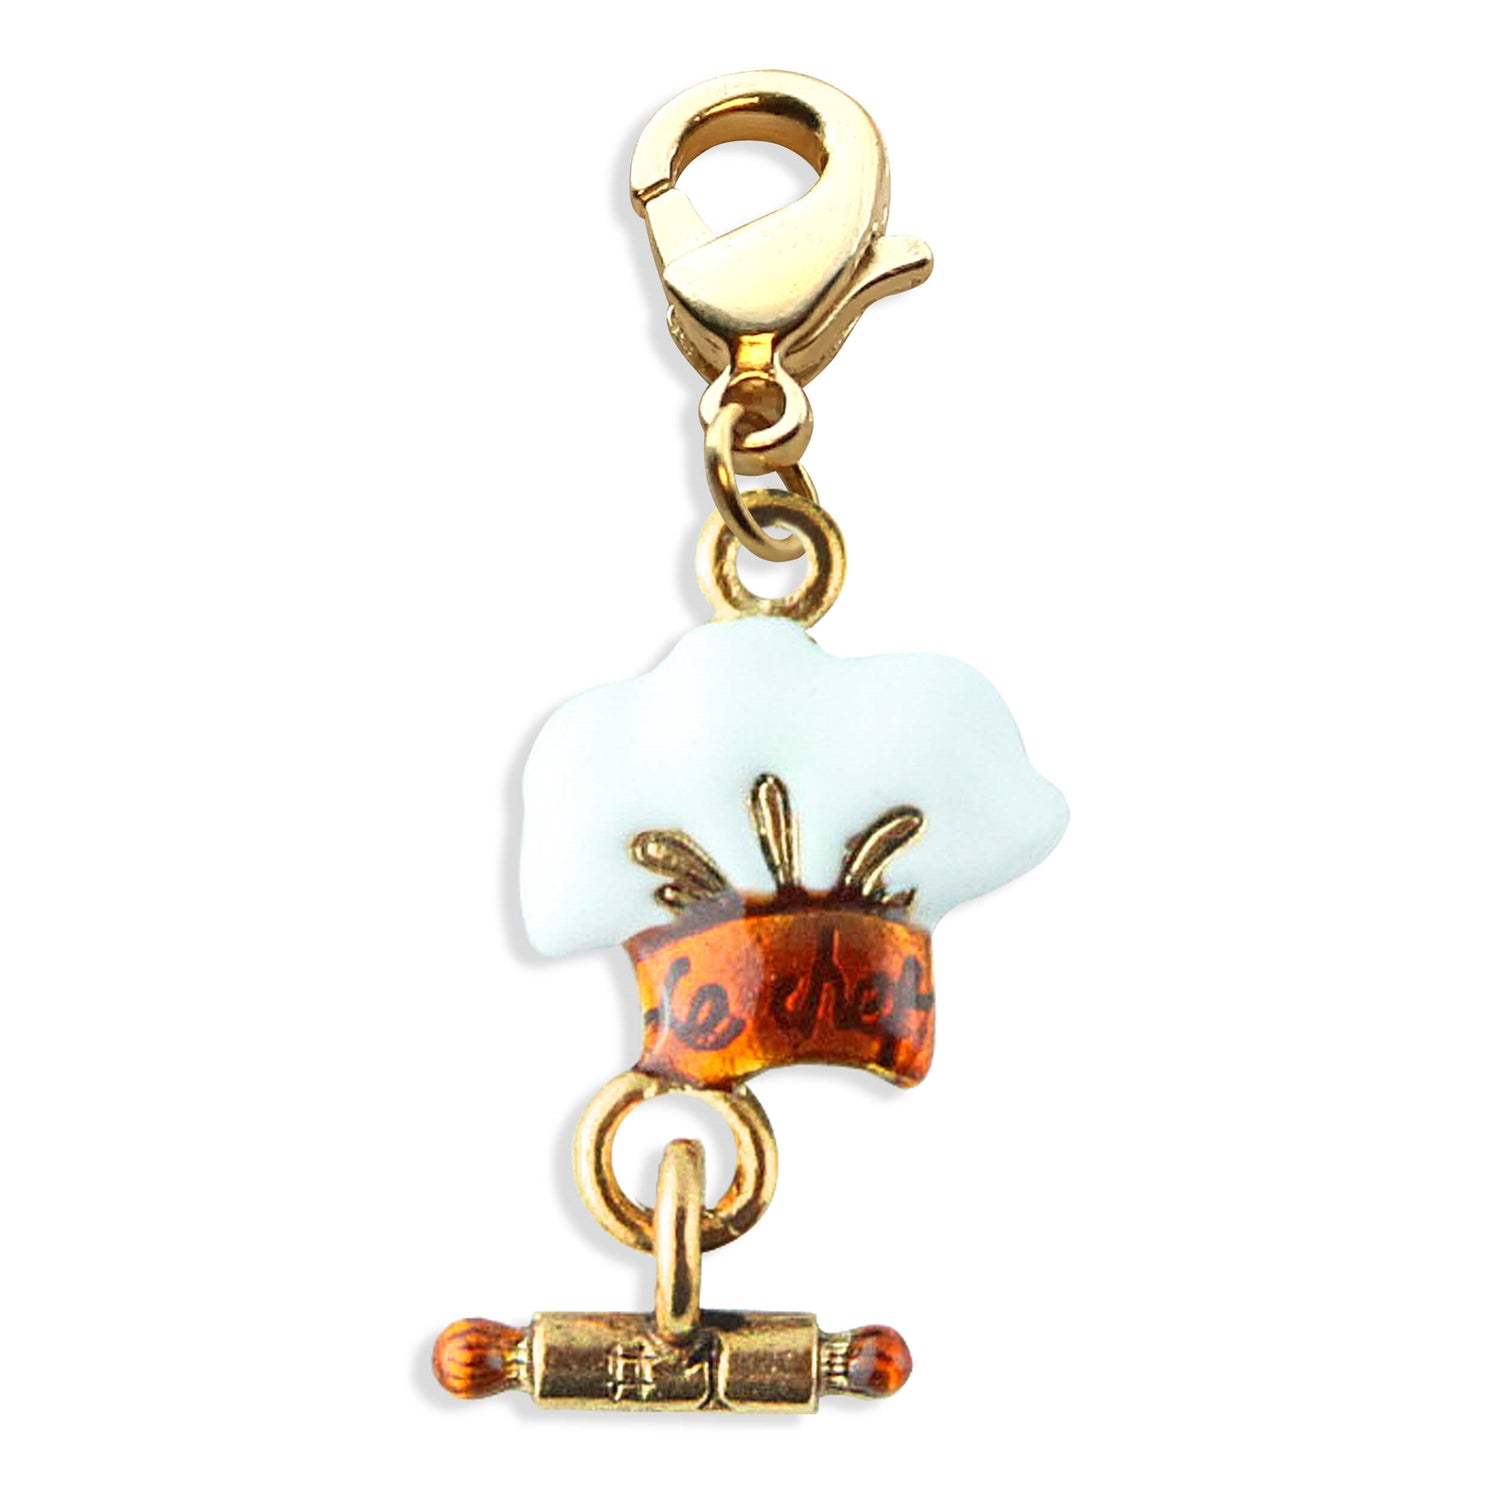 Whimsical Gifts | Chef Hat Charm Dangle in Gold Finish | Hobbies & Special Interests | Chef | Cooking | Baking Charm Dangle